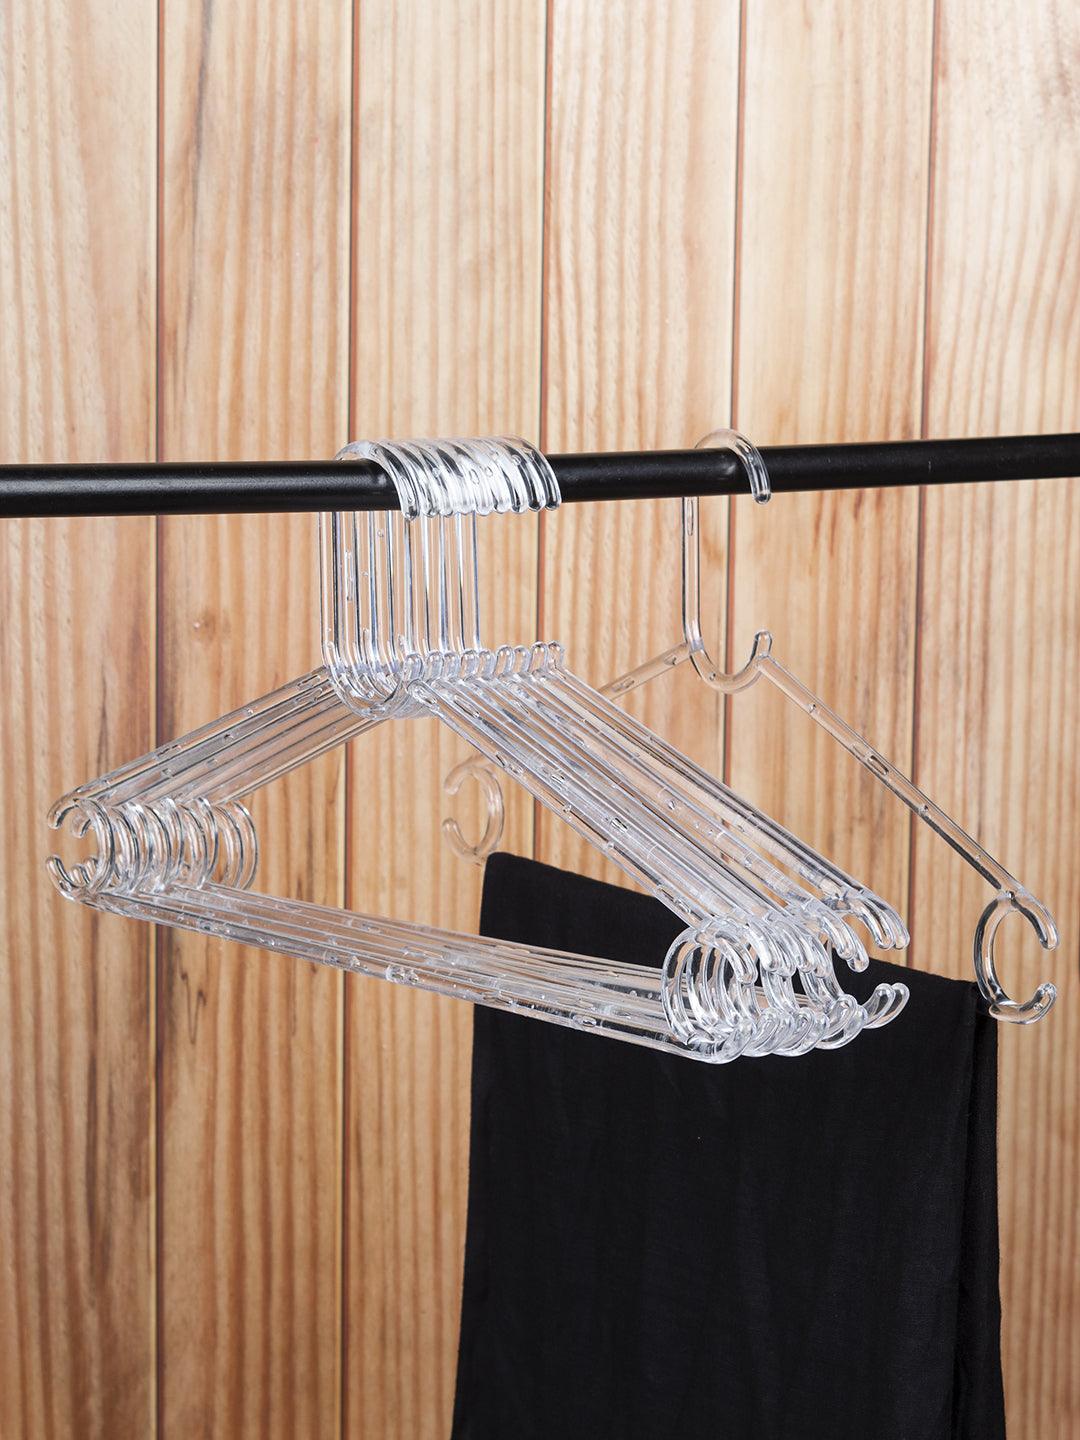 Clothes Hangers, Transparent, Heavy Duty, Clothing Standard